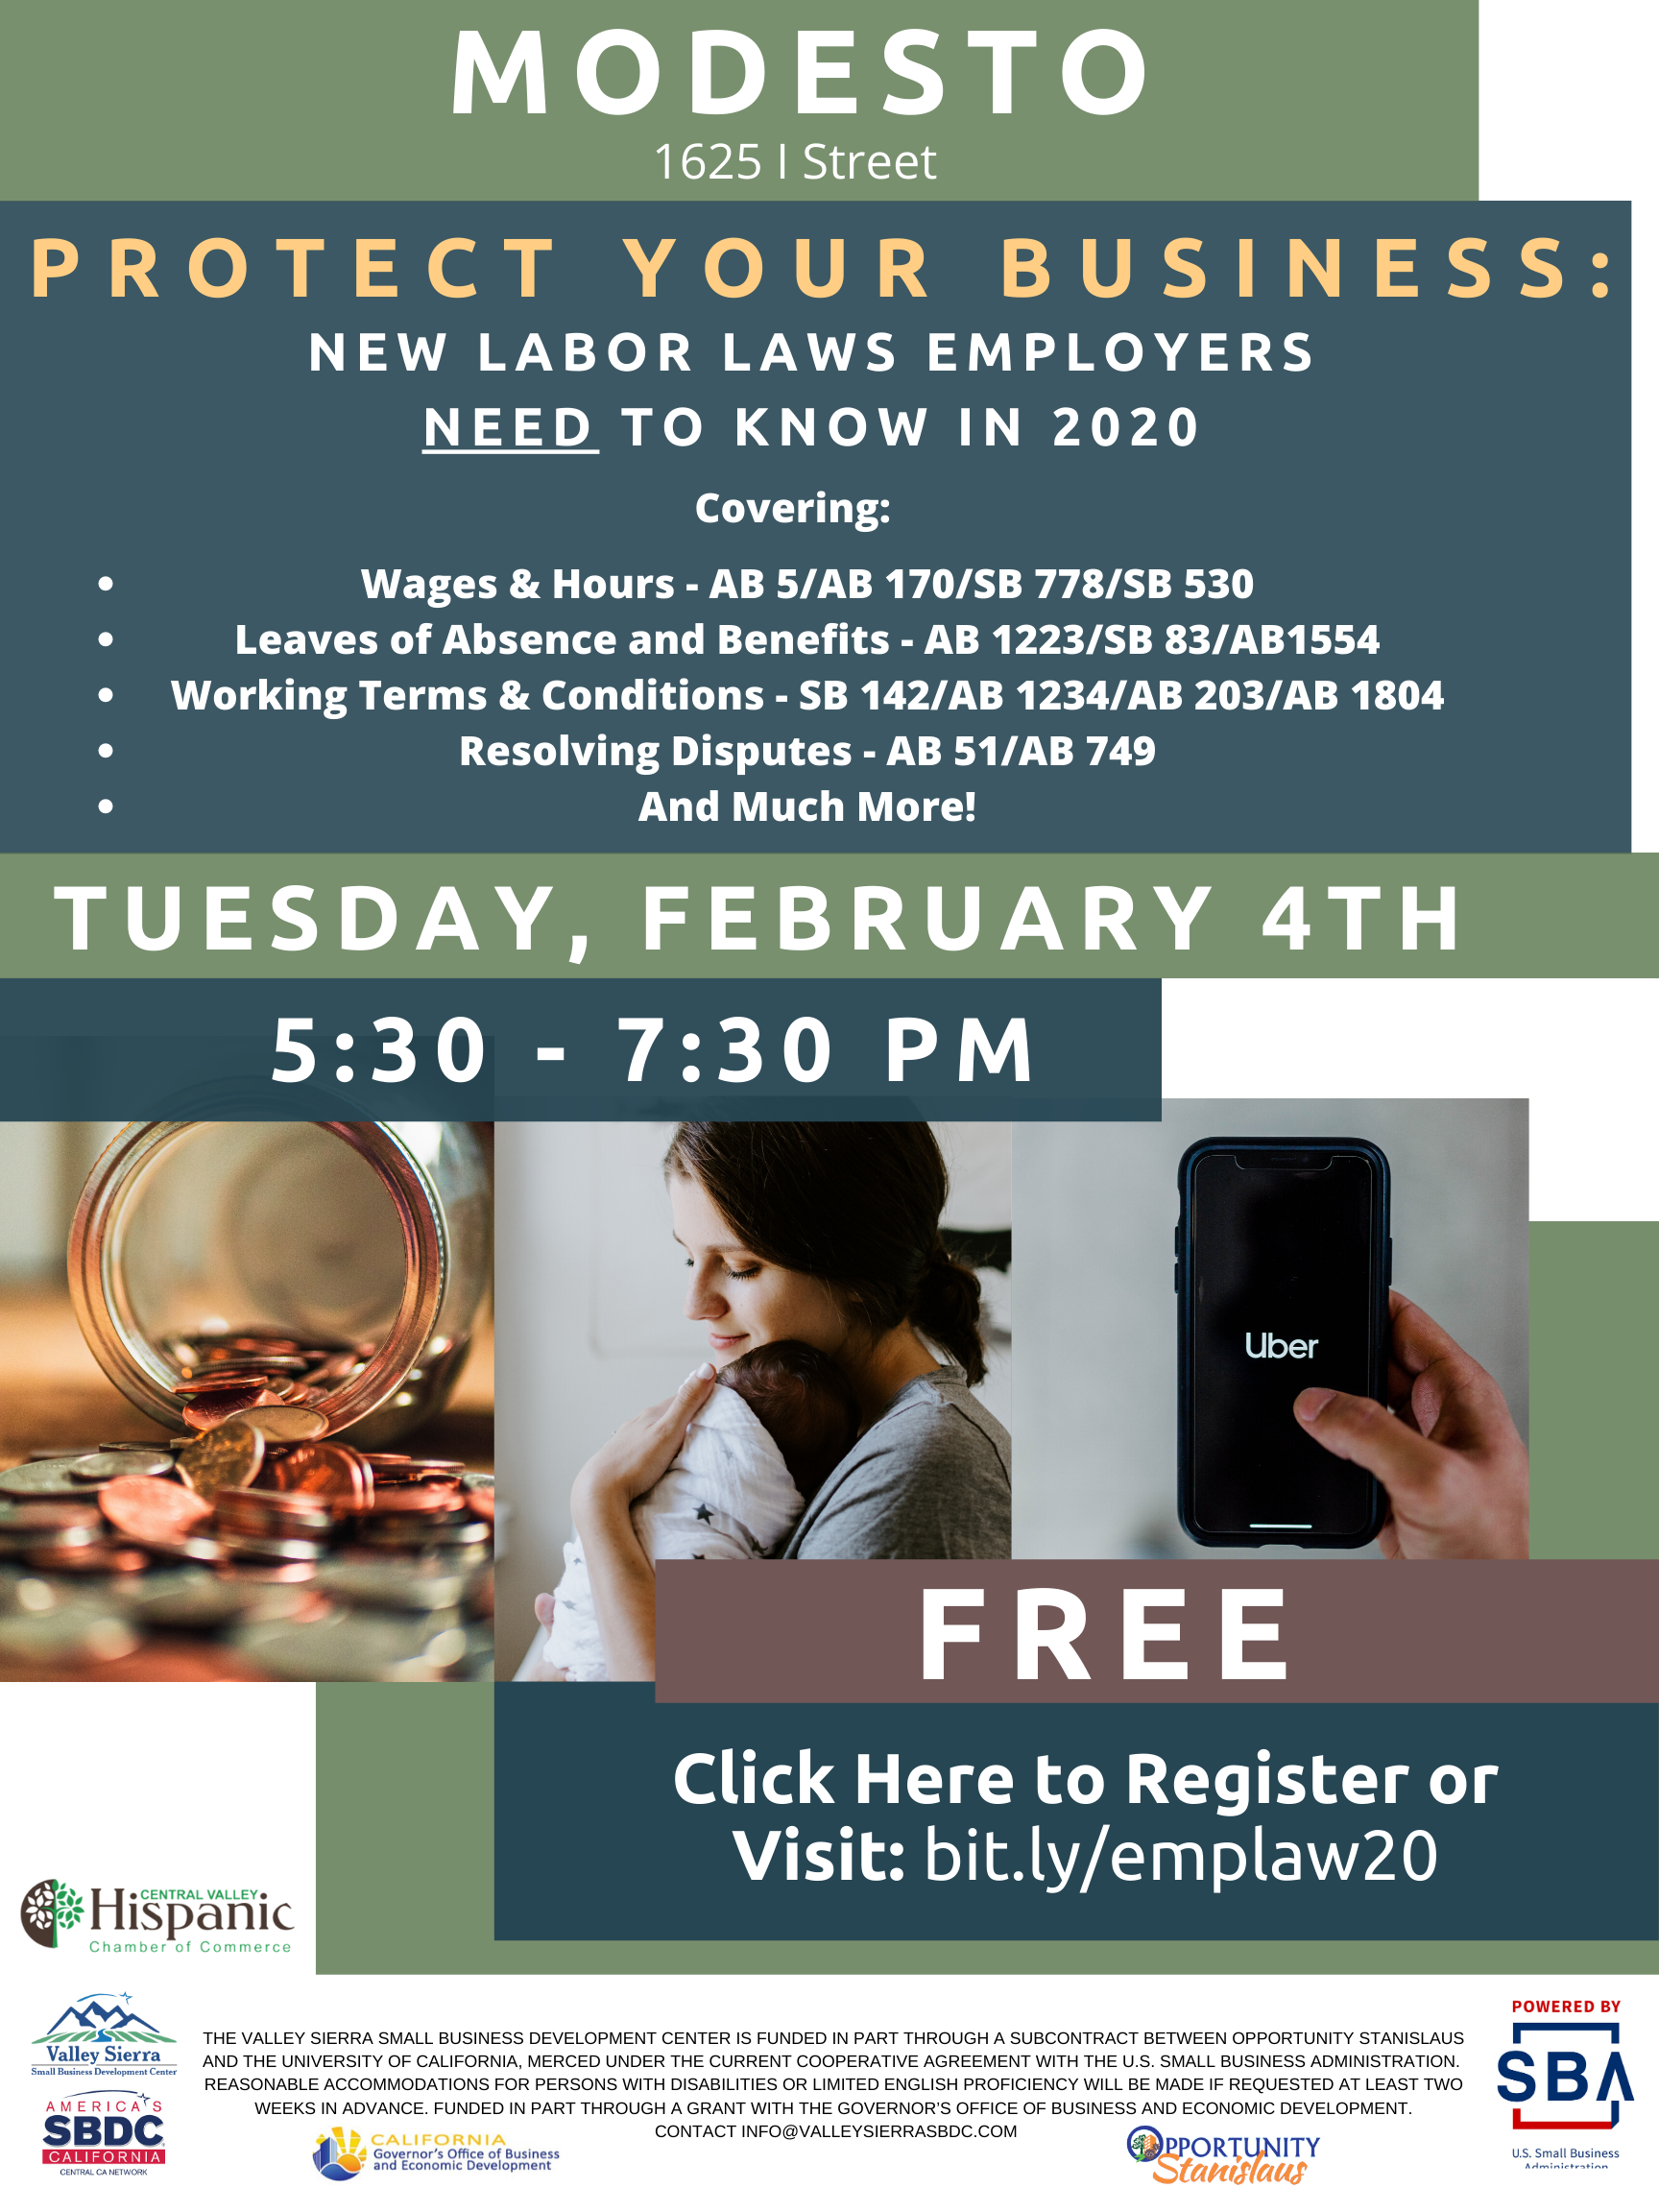 Event Flyer, 2020 New Labor Laws: What Employers Should Know. FREE 2/4/2020, 5:30pm - 7:30pm at the Valley Sierra SBDC, 1625 I STreet, Modesto, CA.